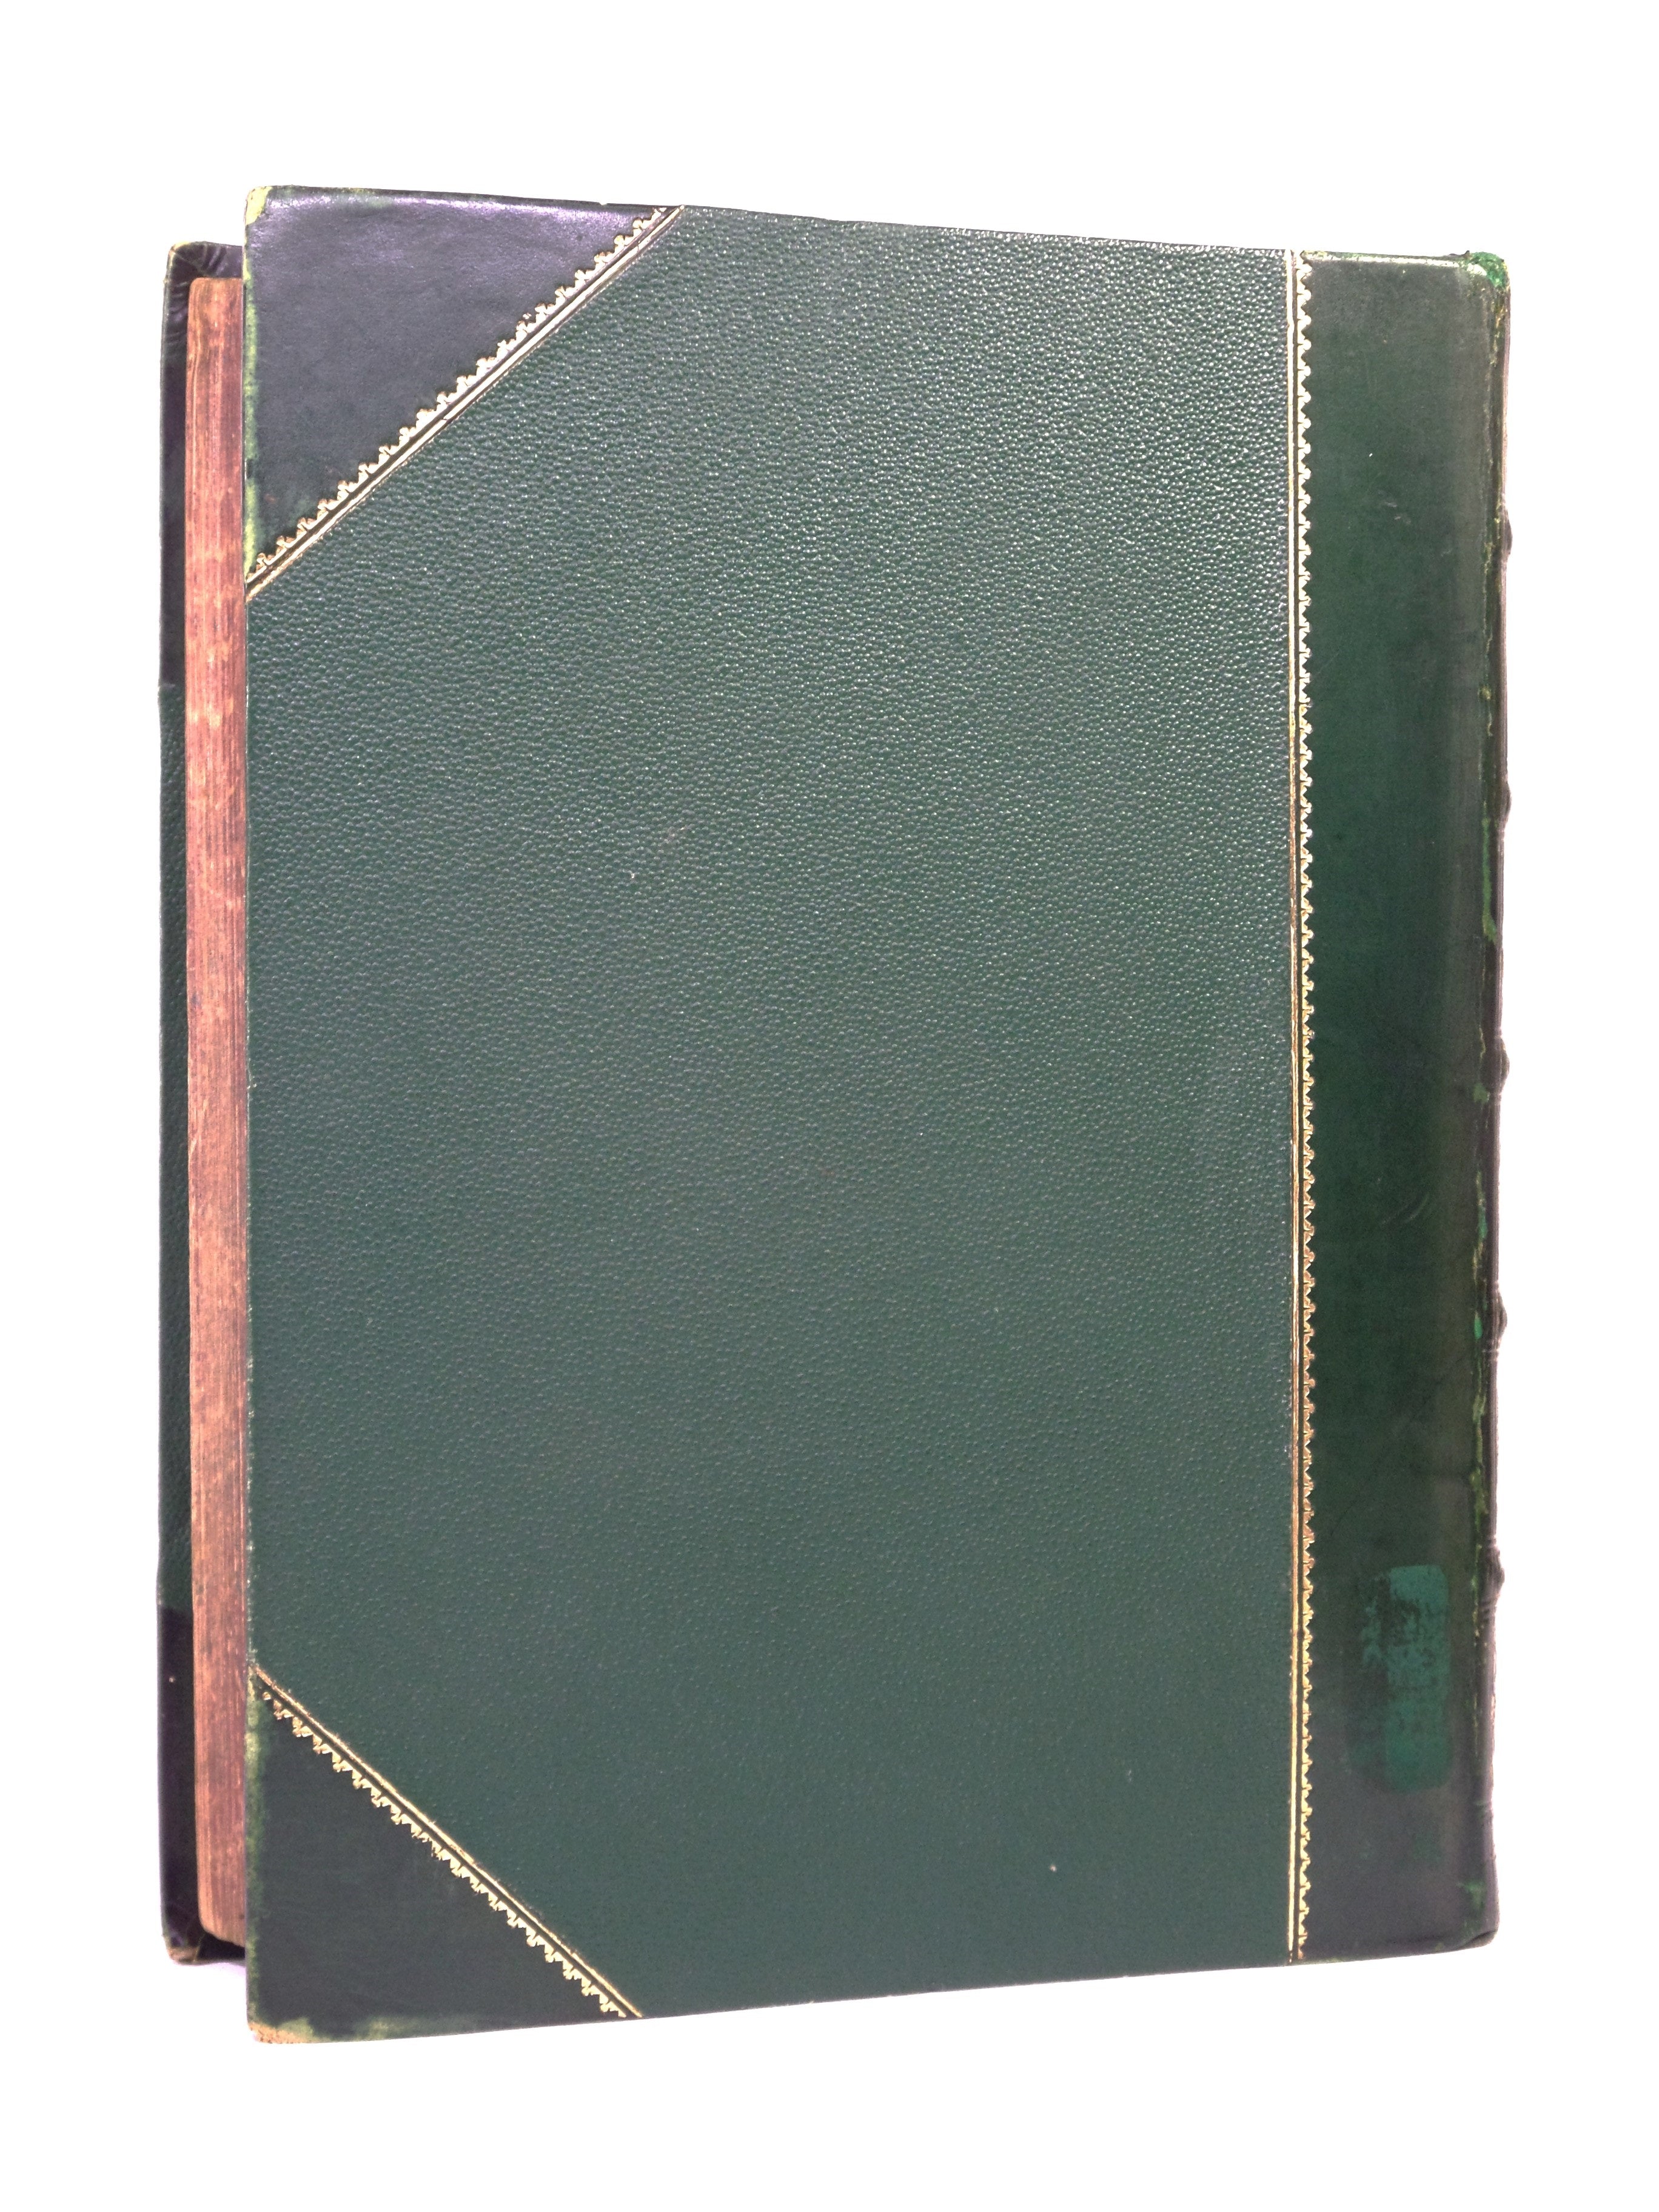 TRILBY BY GEORGE DU MAURIER 1895 FIRST ILLUSTRATED EDITION, LEATHER BOUND